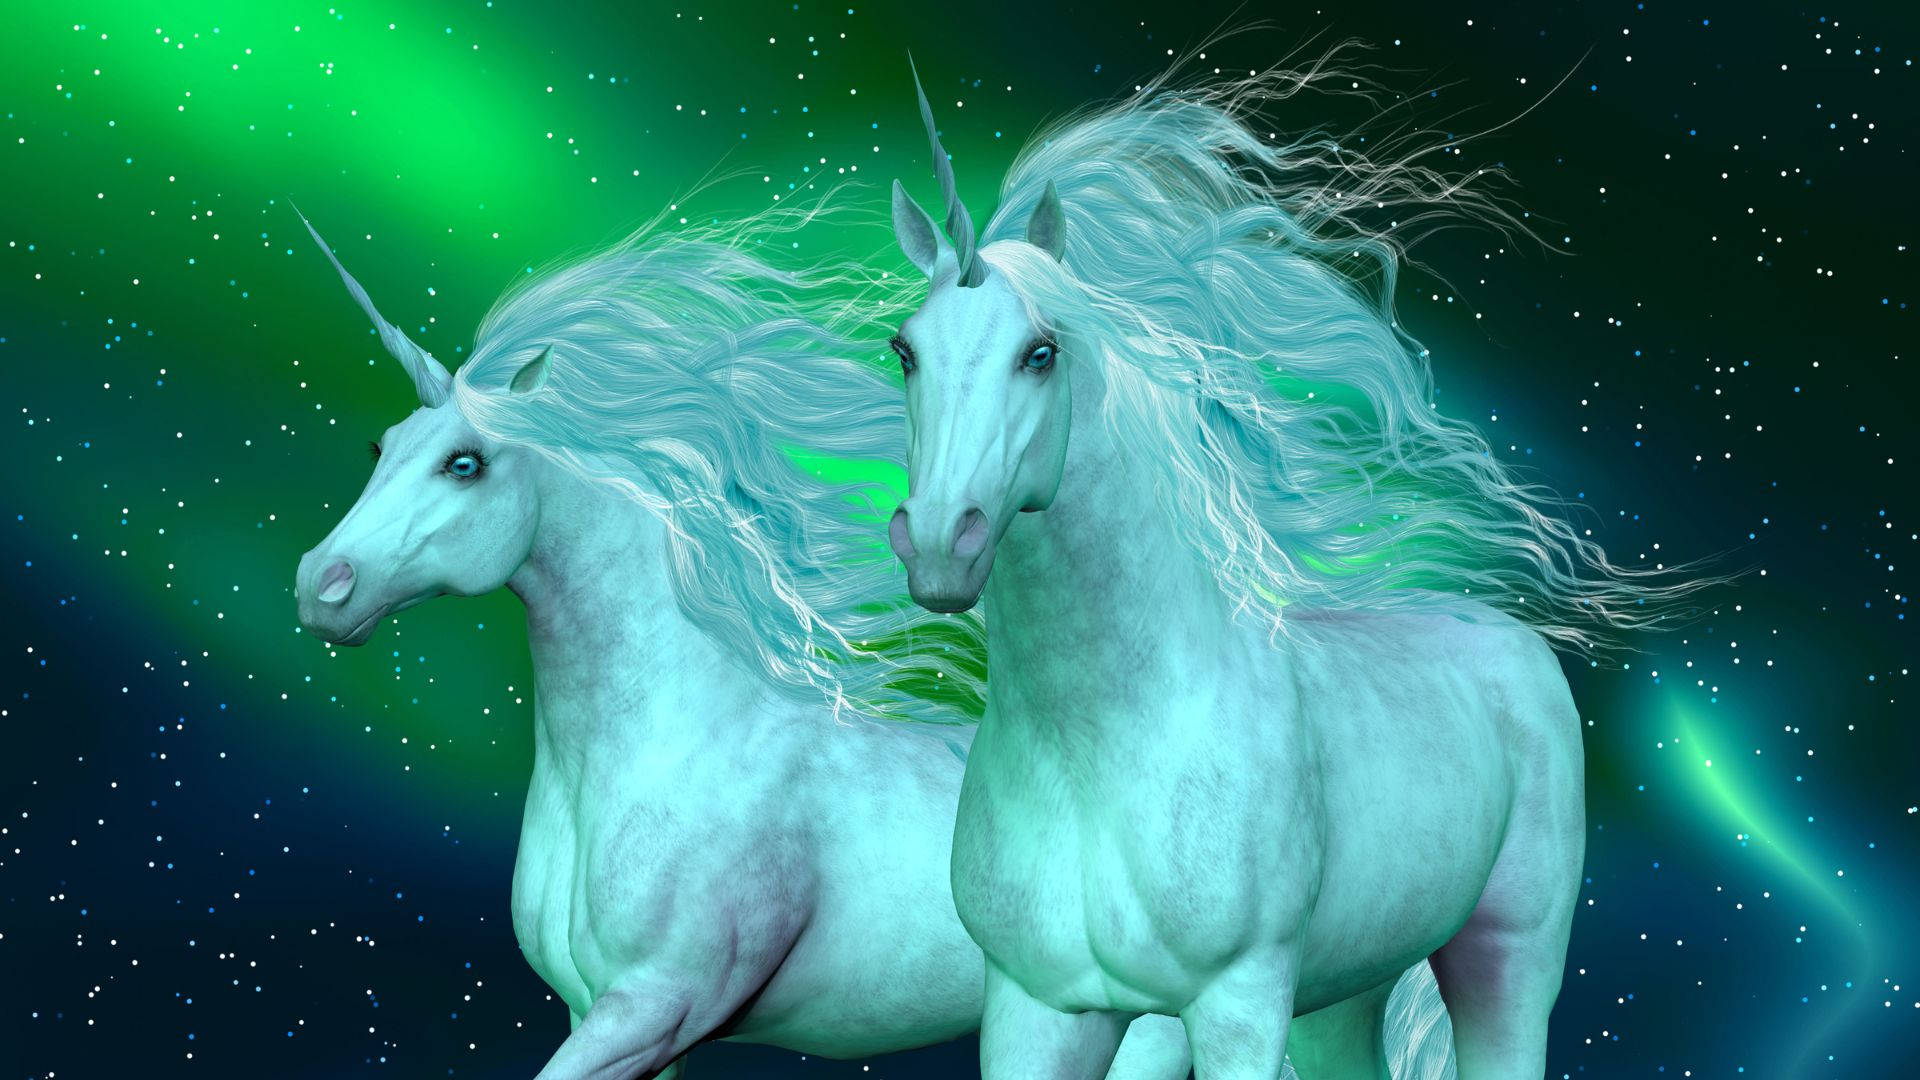 Two White Unicorns Standing In Front Of A Green Aurora Wallpaper